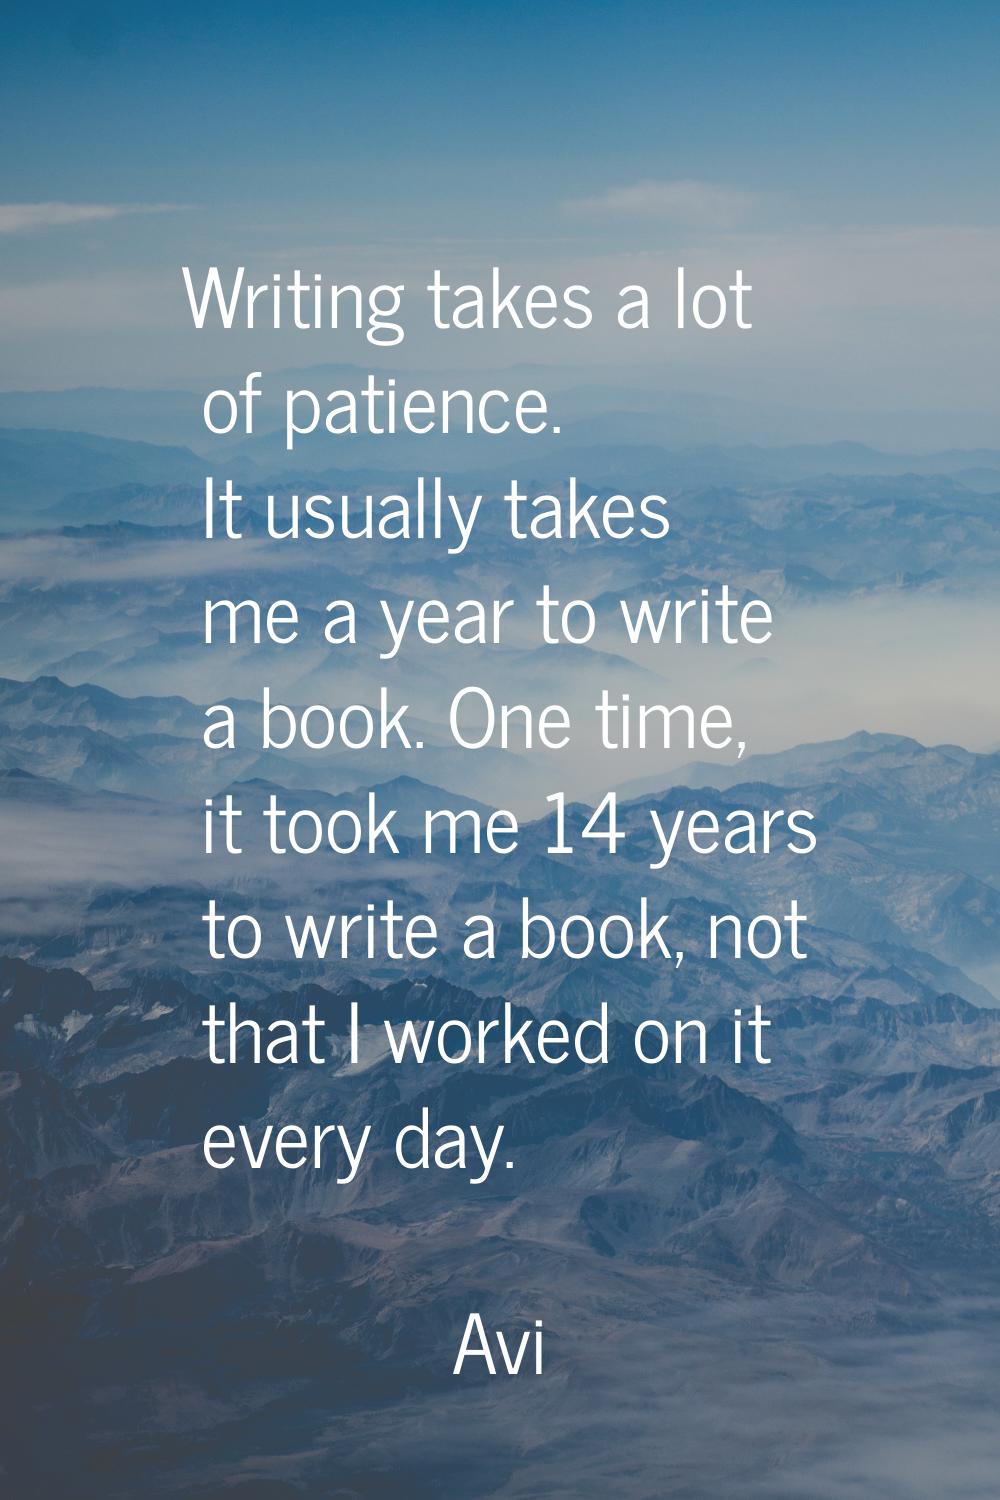 Writing takes a lot of patience. It usually takes me a year to write a book. One time, it took me 1